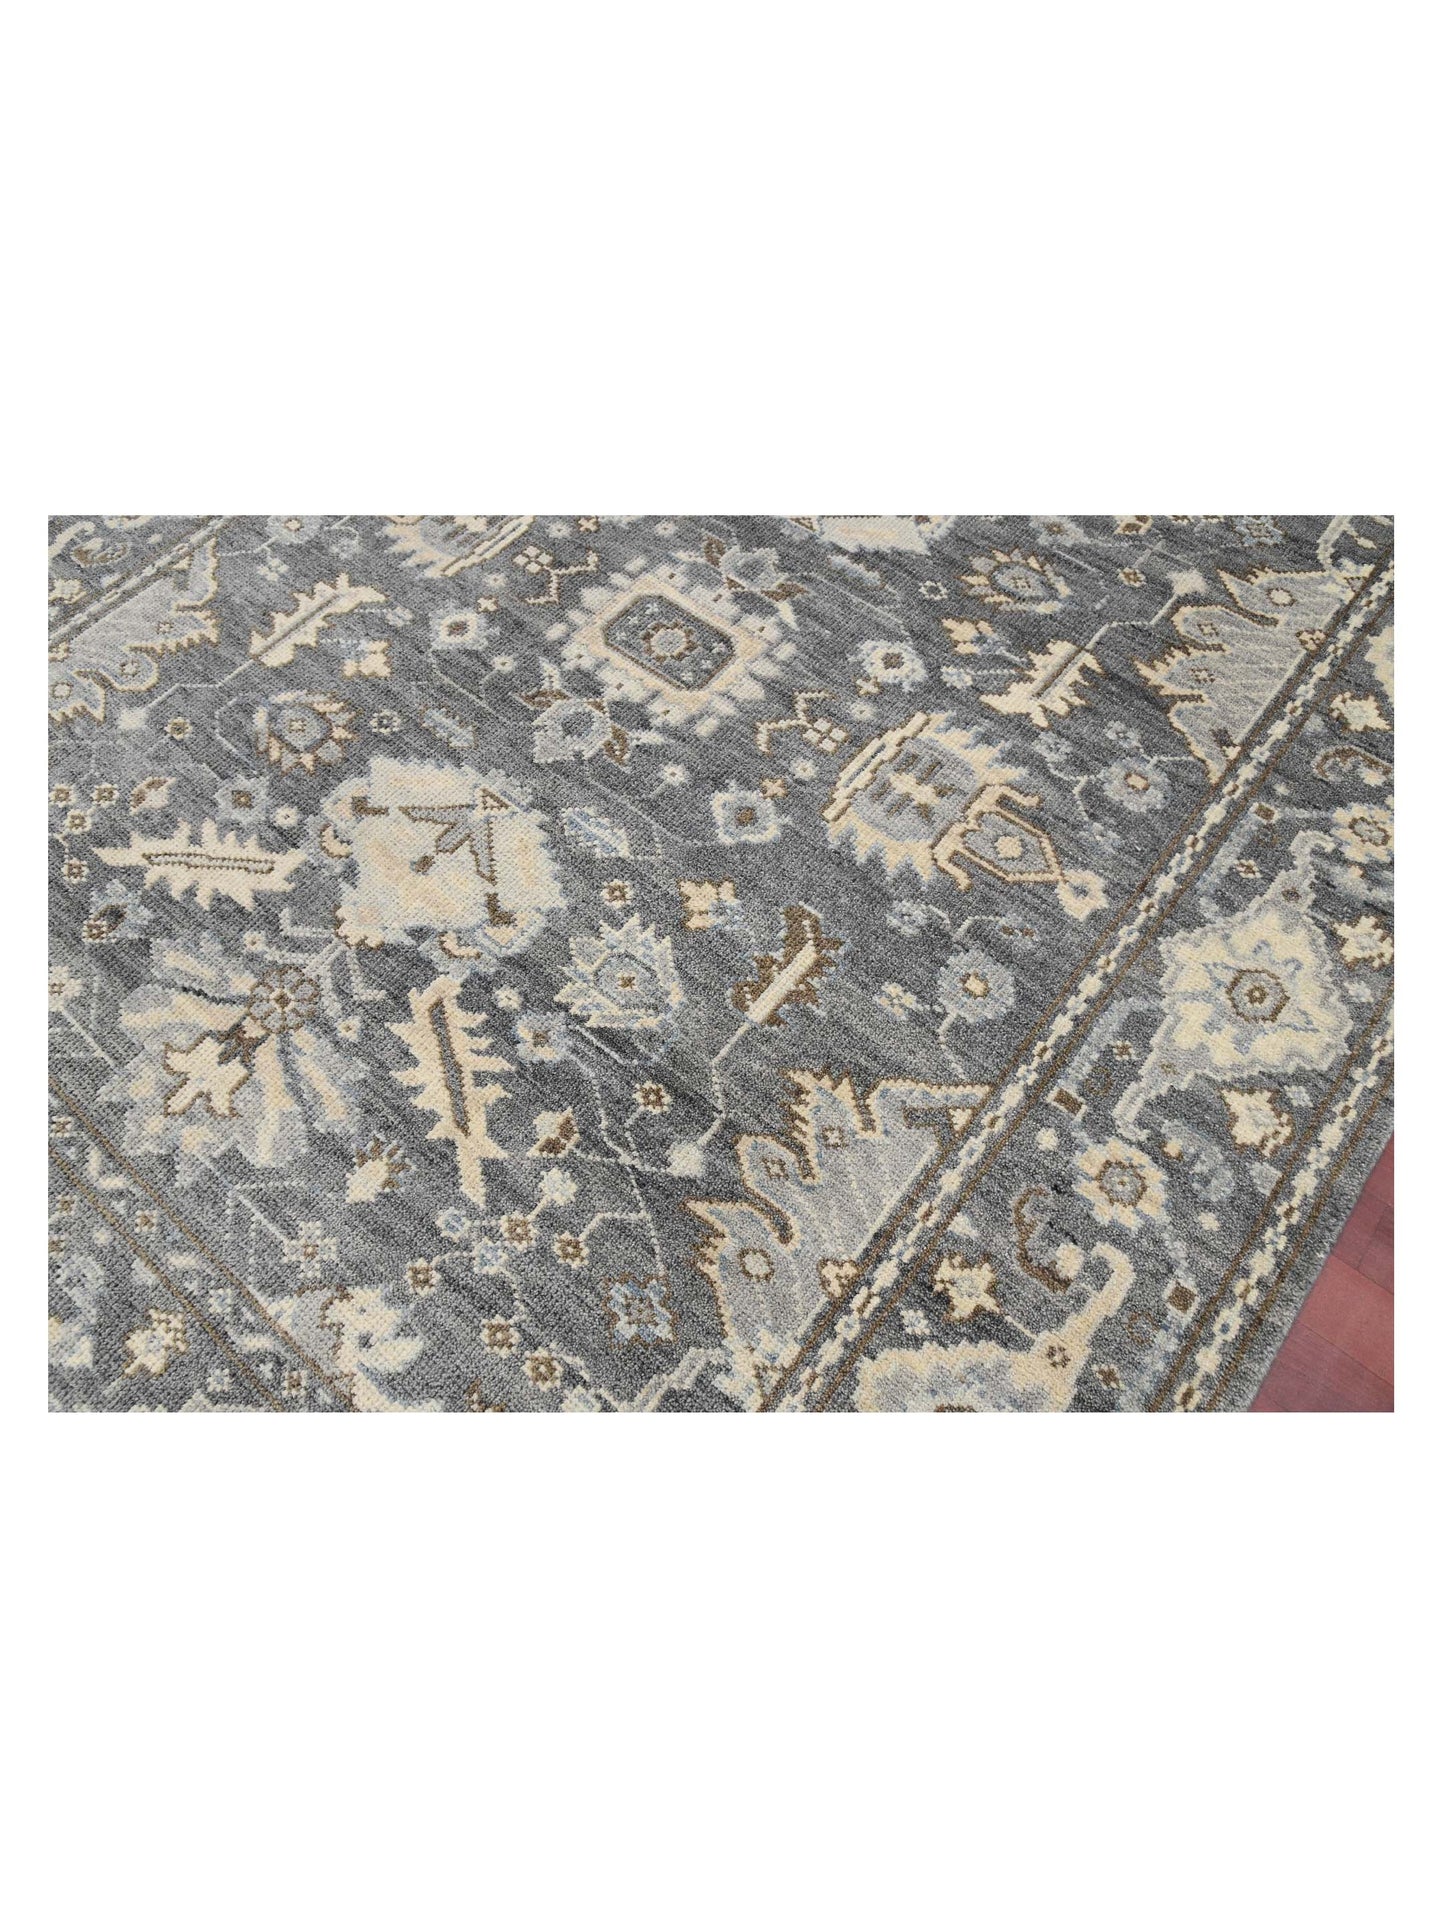 Limited DERBY DE-155 BROWN BEIGE Traditional Knotted Rug